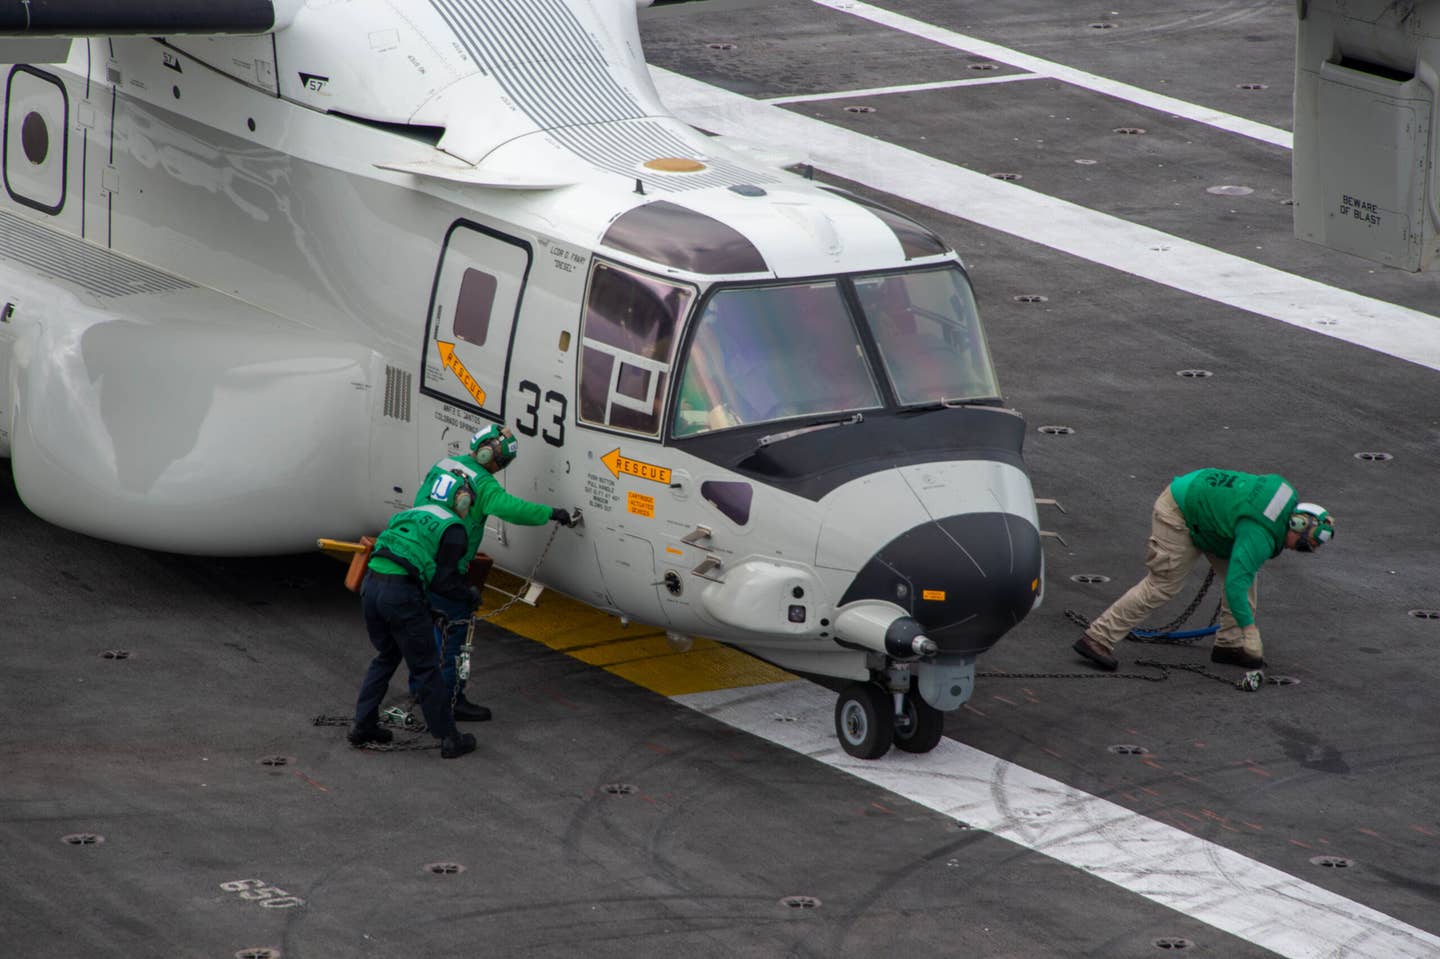 220429-N-TL932-1098 PACIFIC OCEAN (Apr. 29, 2022) Sailors prepare a CMV-22B Osprey, assigned to the “Titans” of Fleet Logistics Multi-Mission Squadron (VRM) 30, for flight on the flight deck of Nimitz-class aircraft carrier USS Carl Vinson (CVN 70), April 29. Vinson is currently underway conducting routine maritime operations in the Pacific Ocean. (U.S. Navy photo by Mass Communication Specialist Seaman Joshua Sapien)